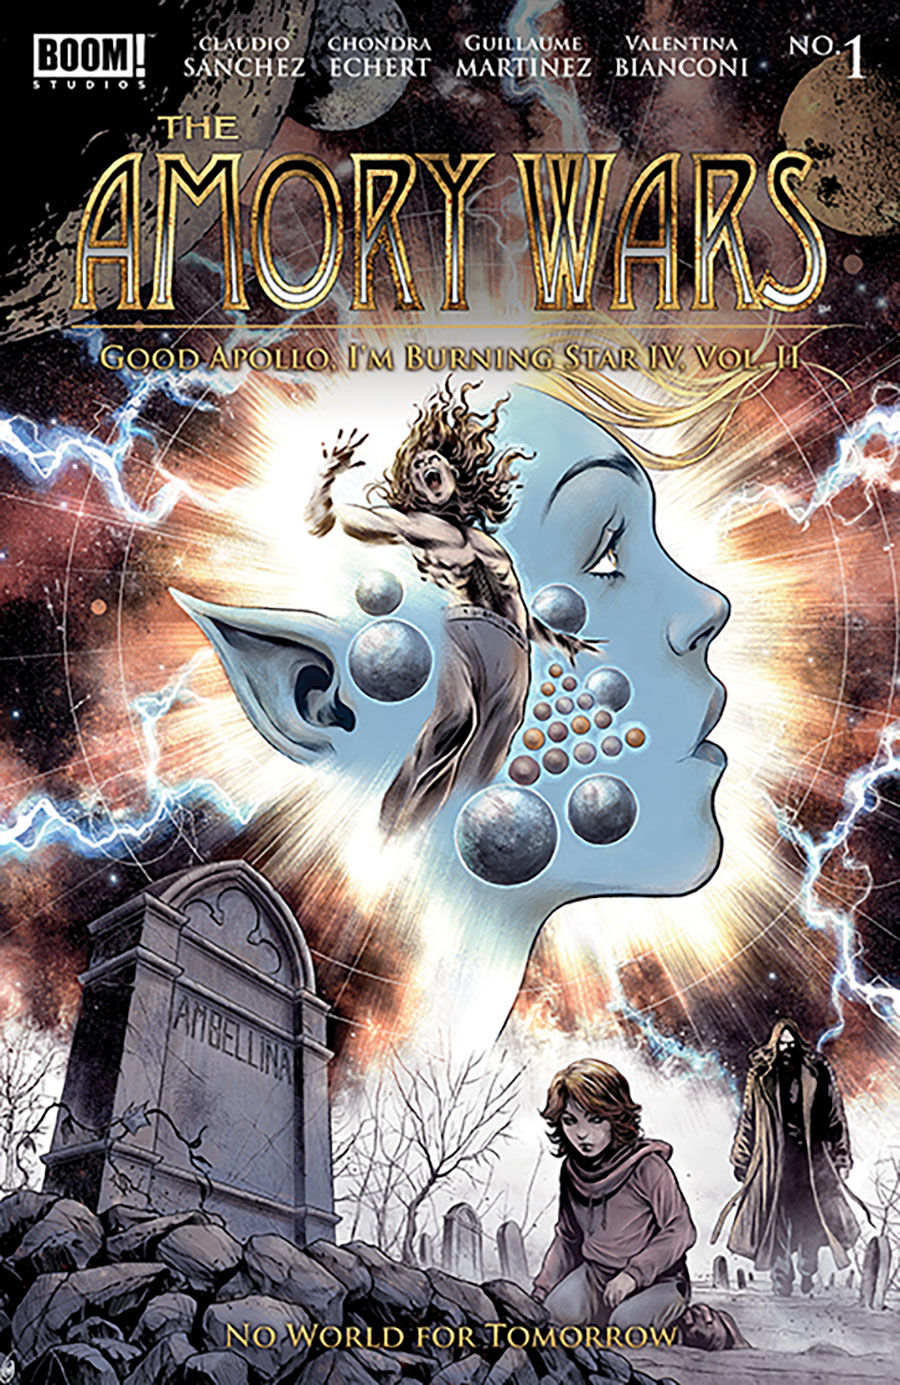 Amory Wars Good Apollo Im Burning Star IV Vol 2 No World For Tomorrow #1 Cover A Regular Gianluca Gugliotta Cover